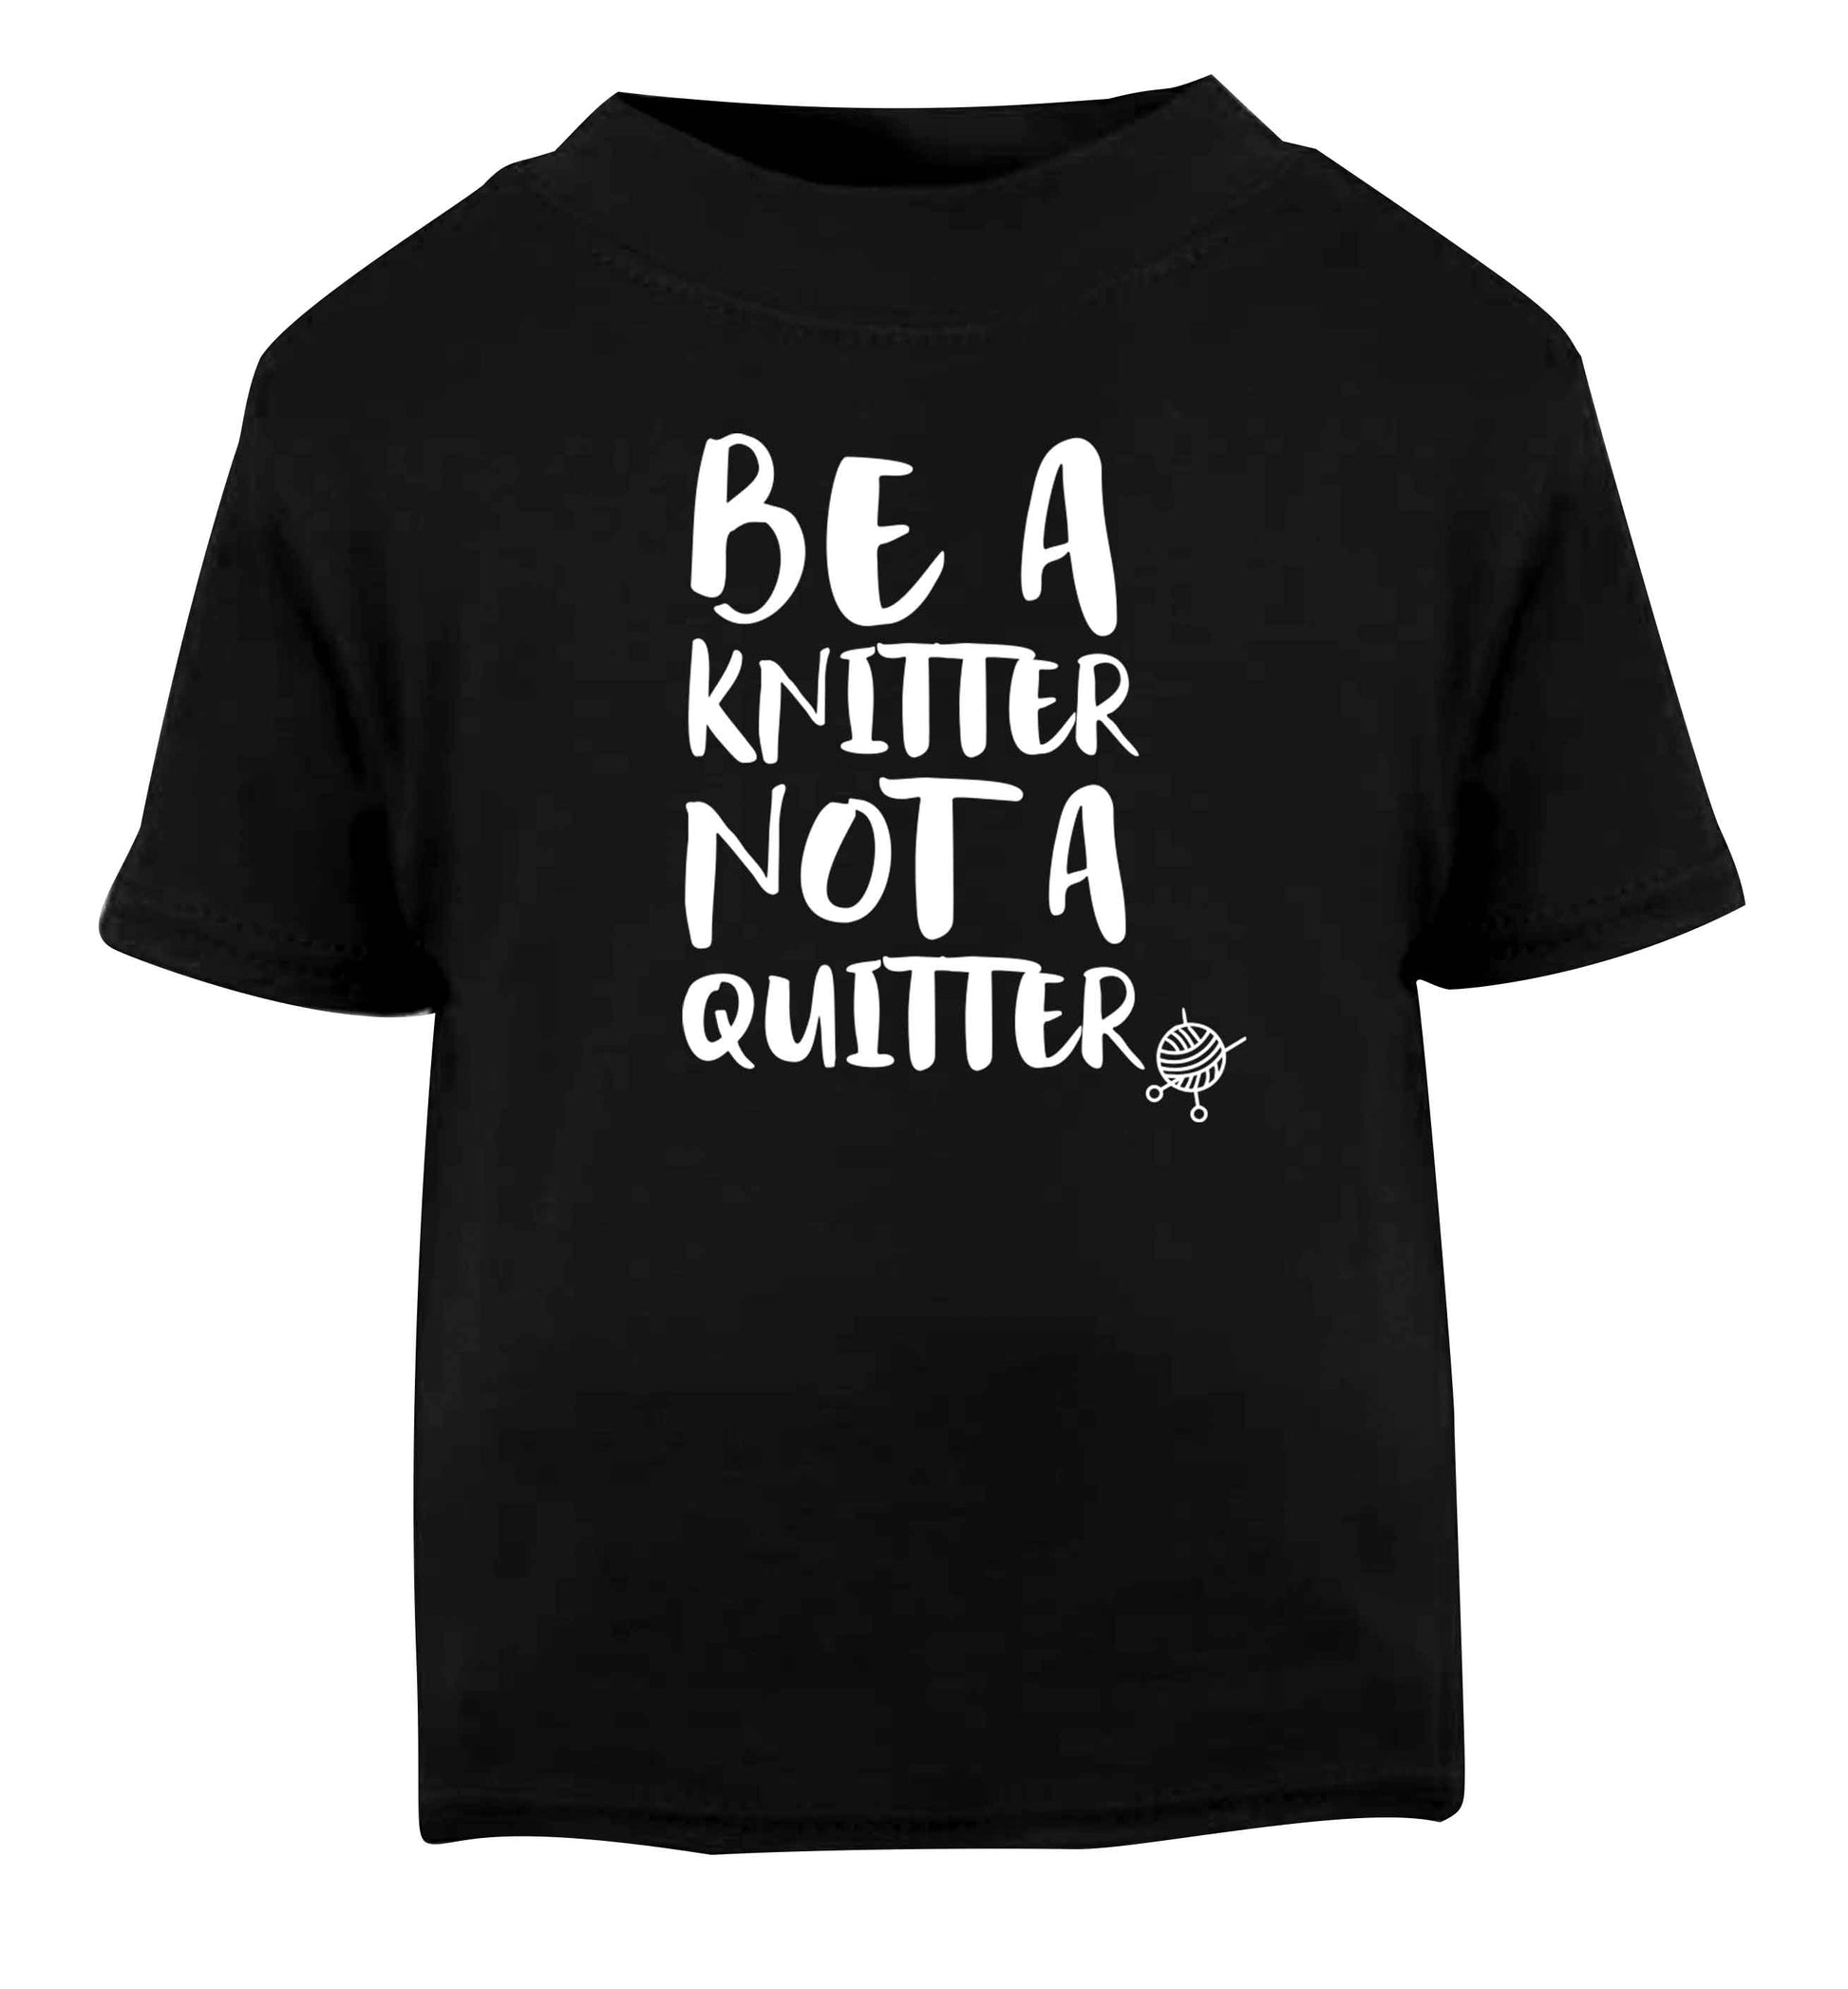 Be a knitter not a quitter Black Baby Toddler Tshirt 2 years